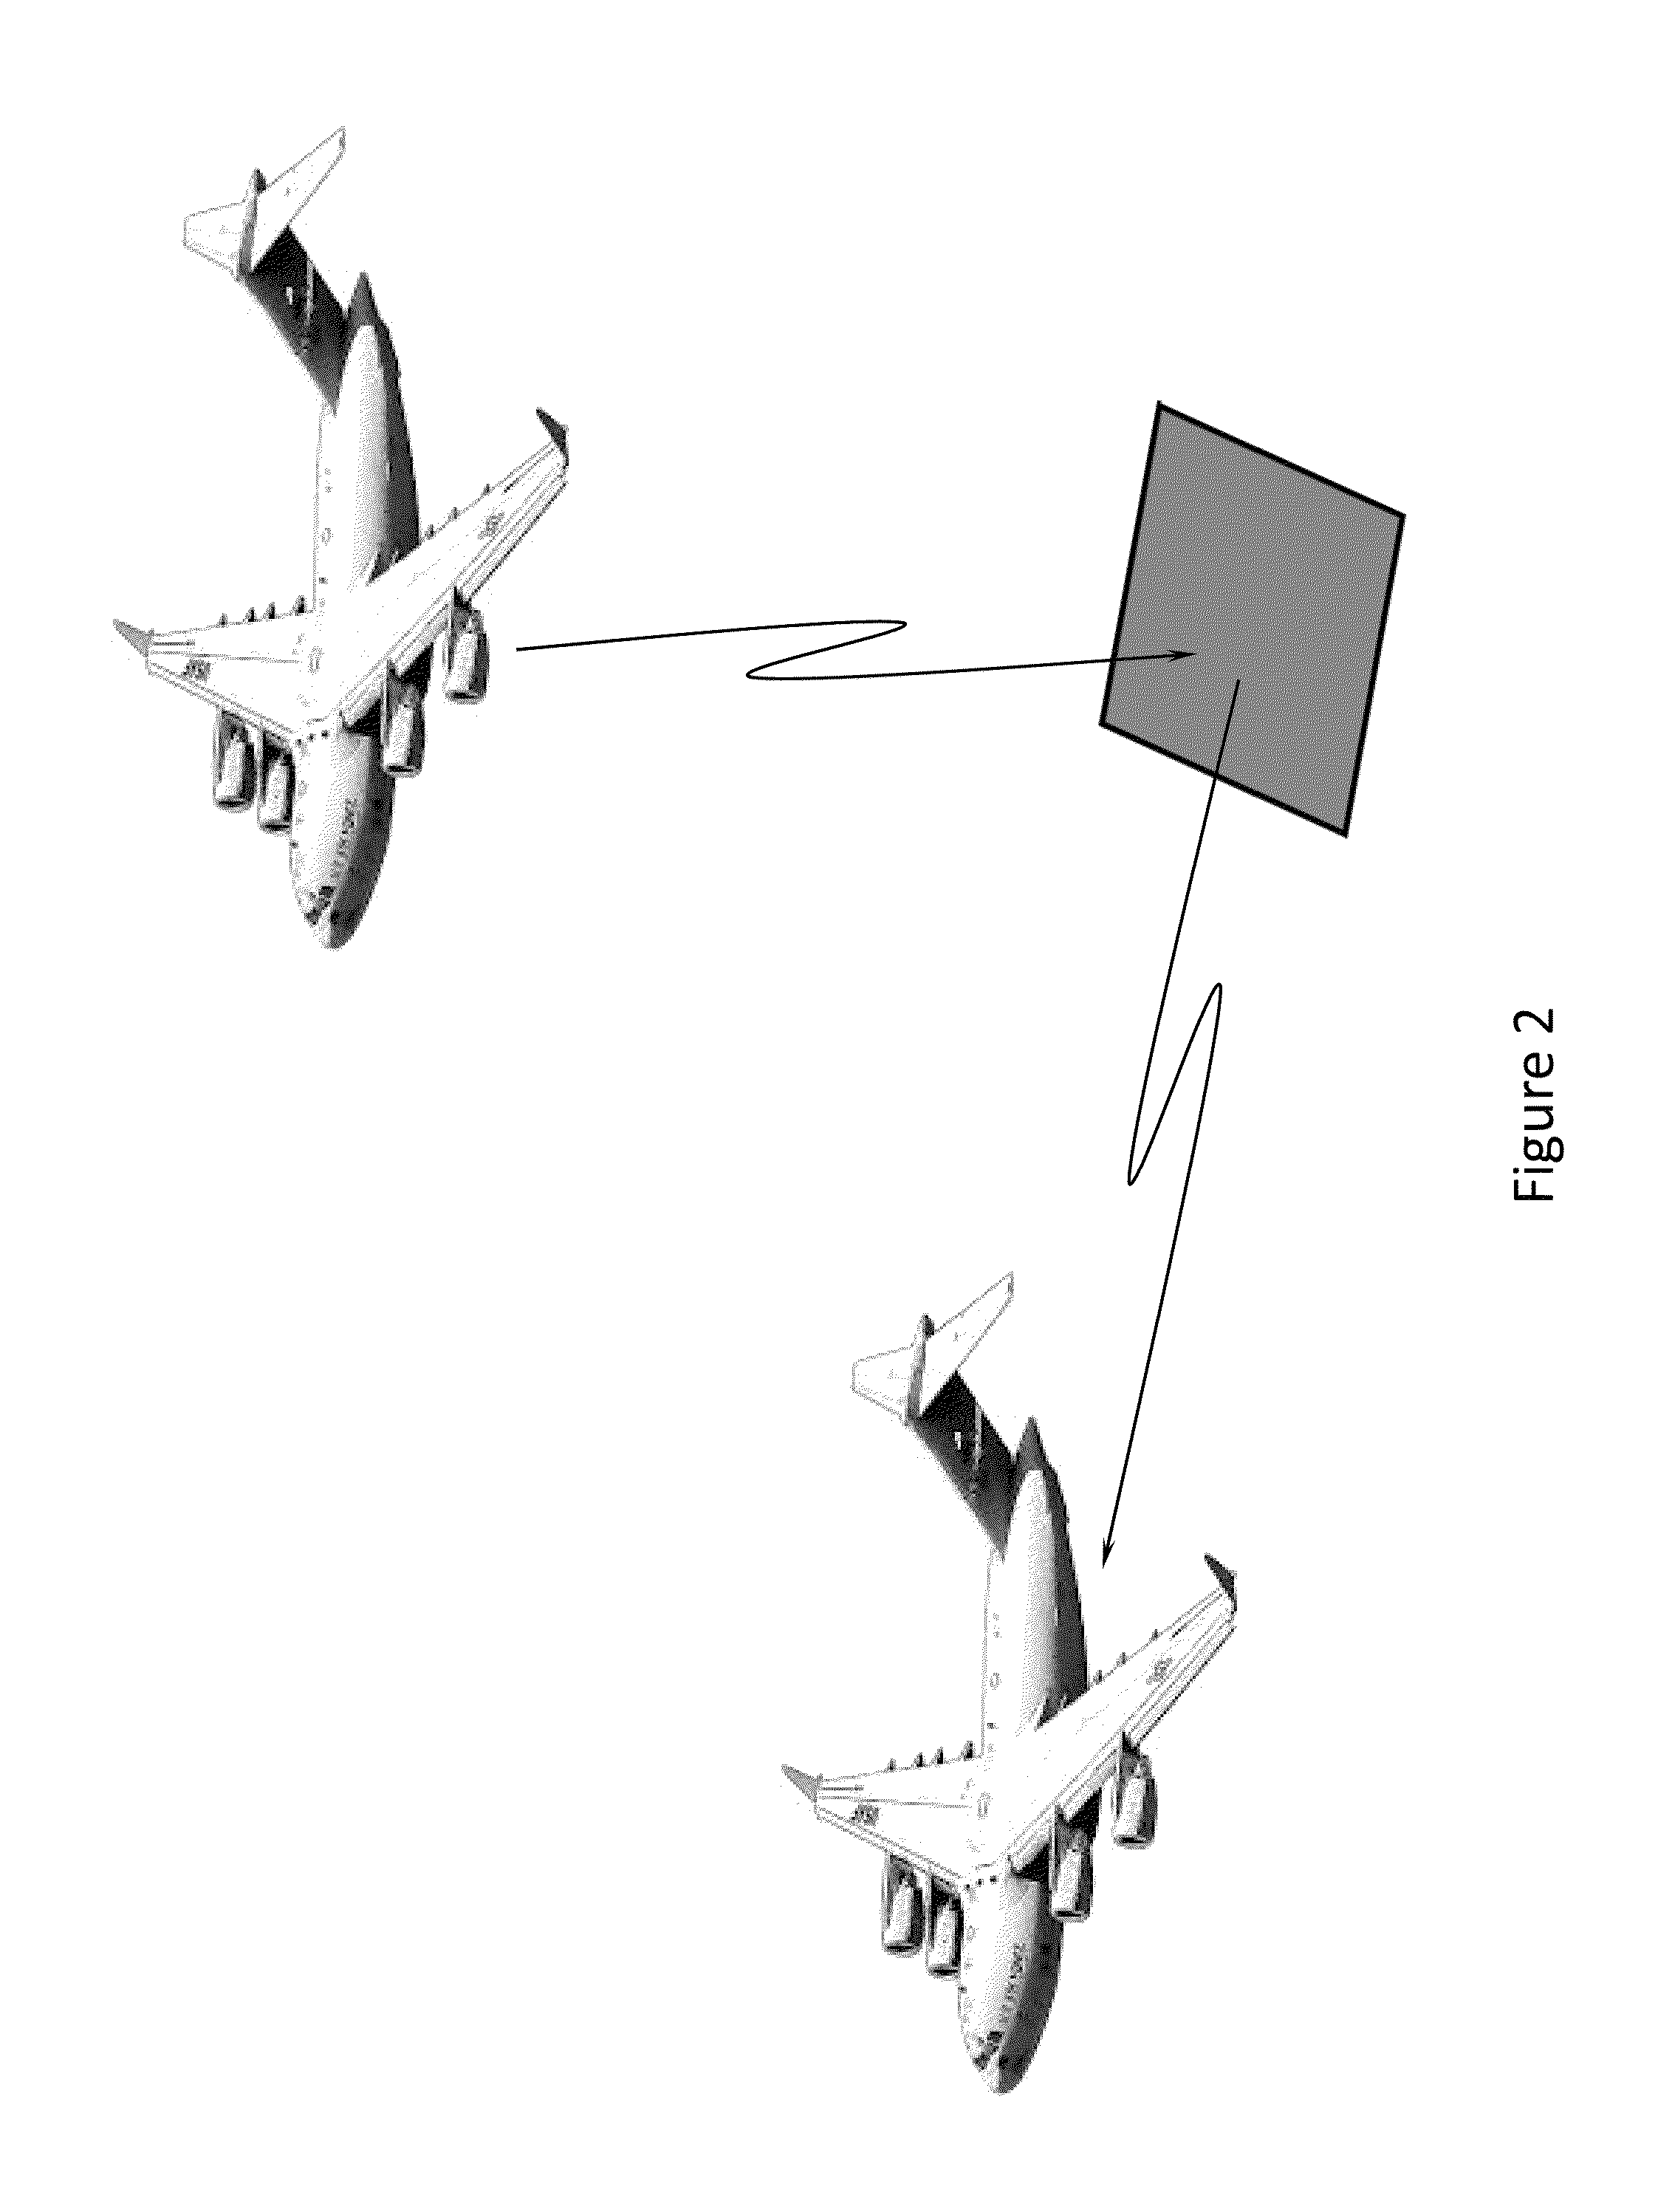 System for airborne communications